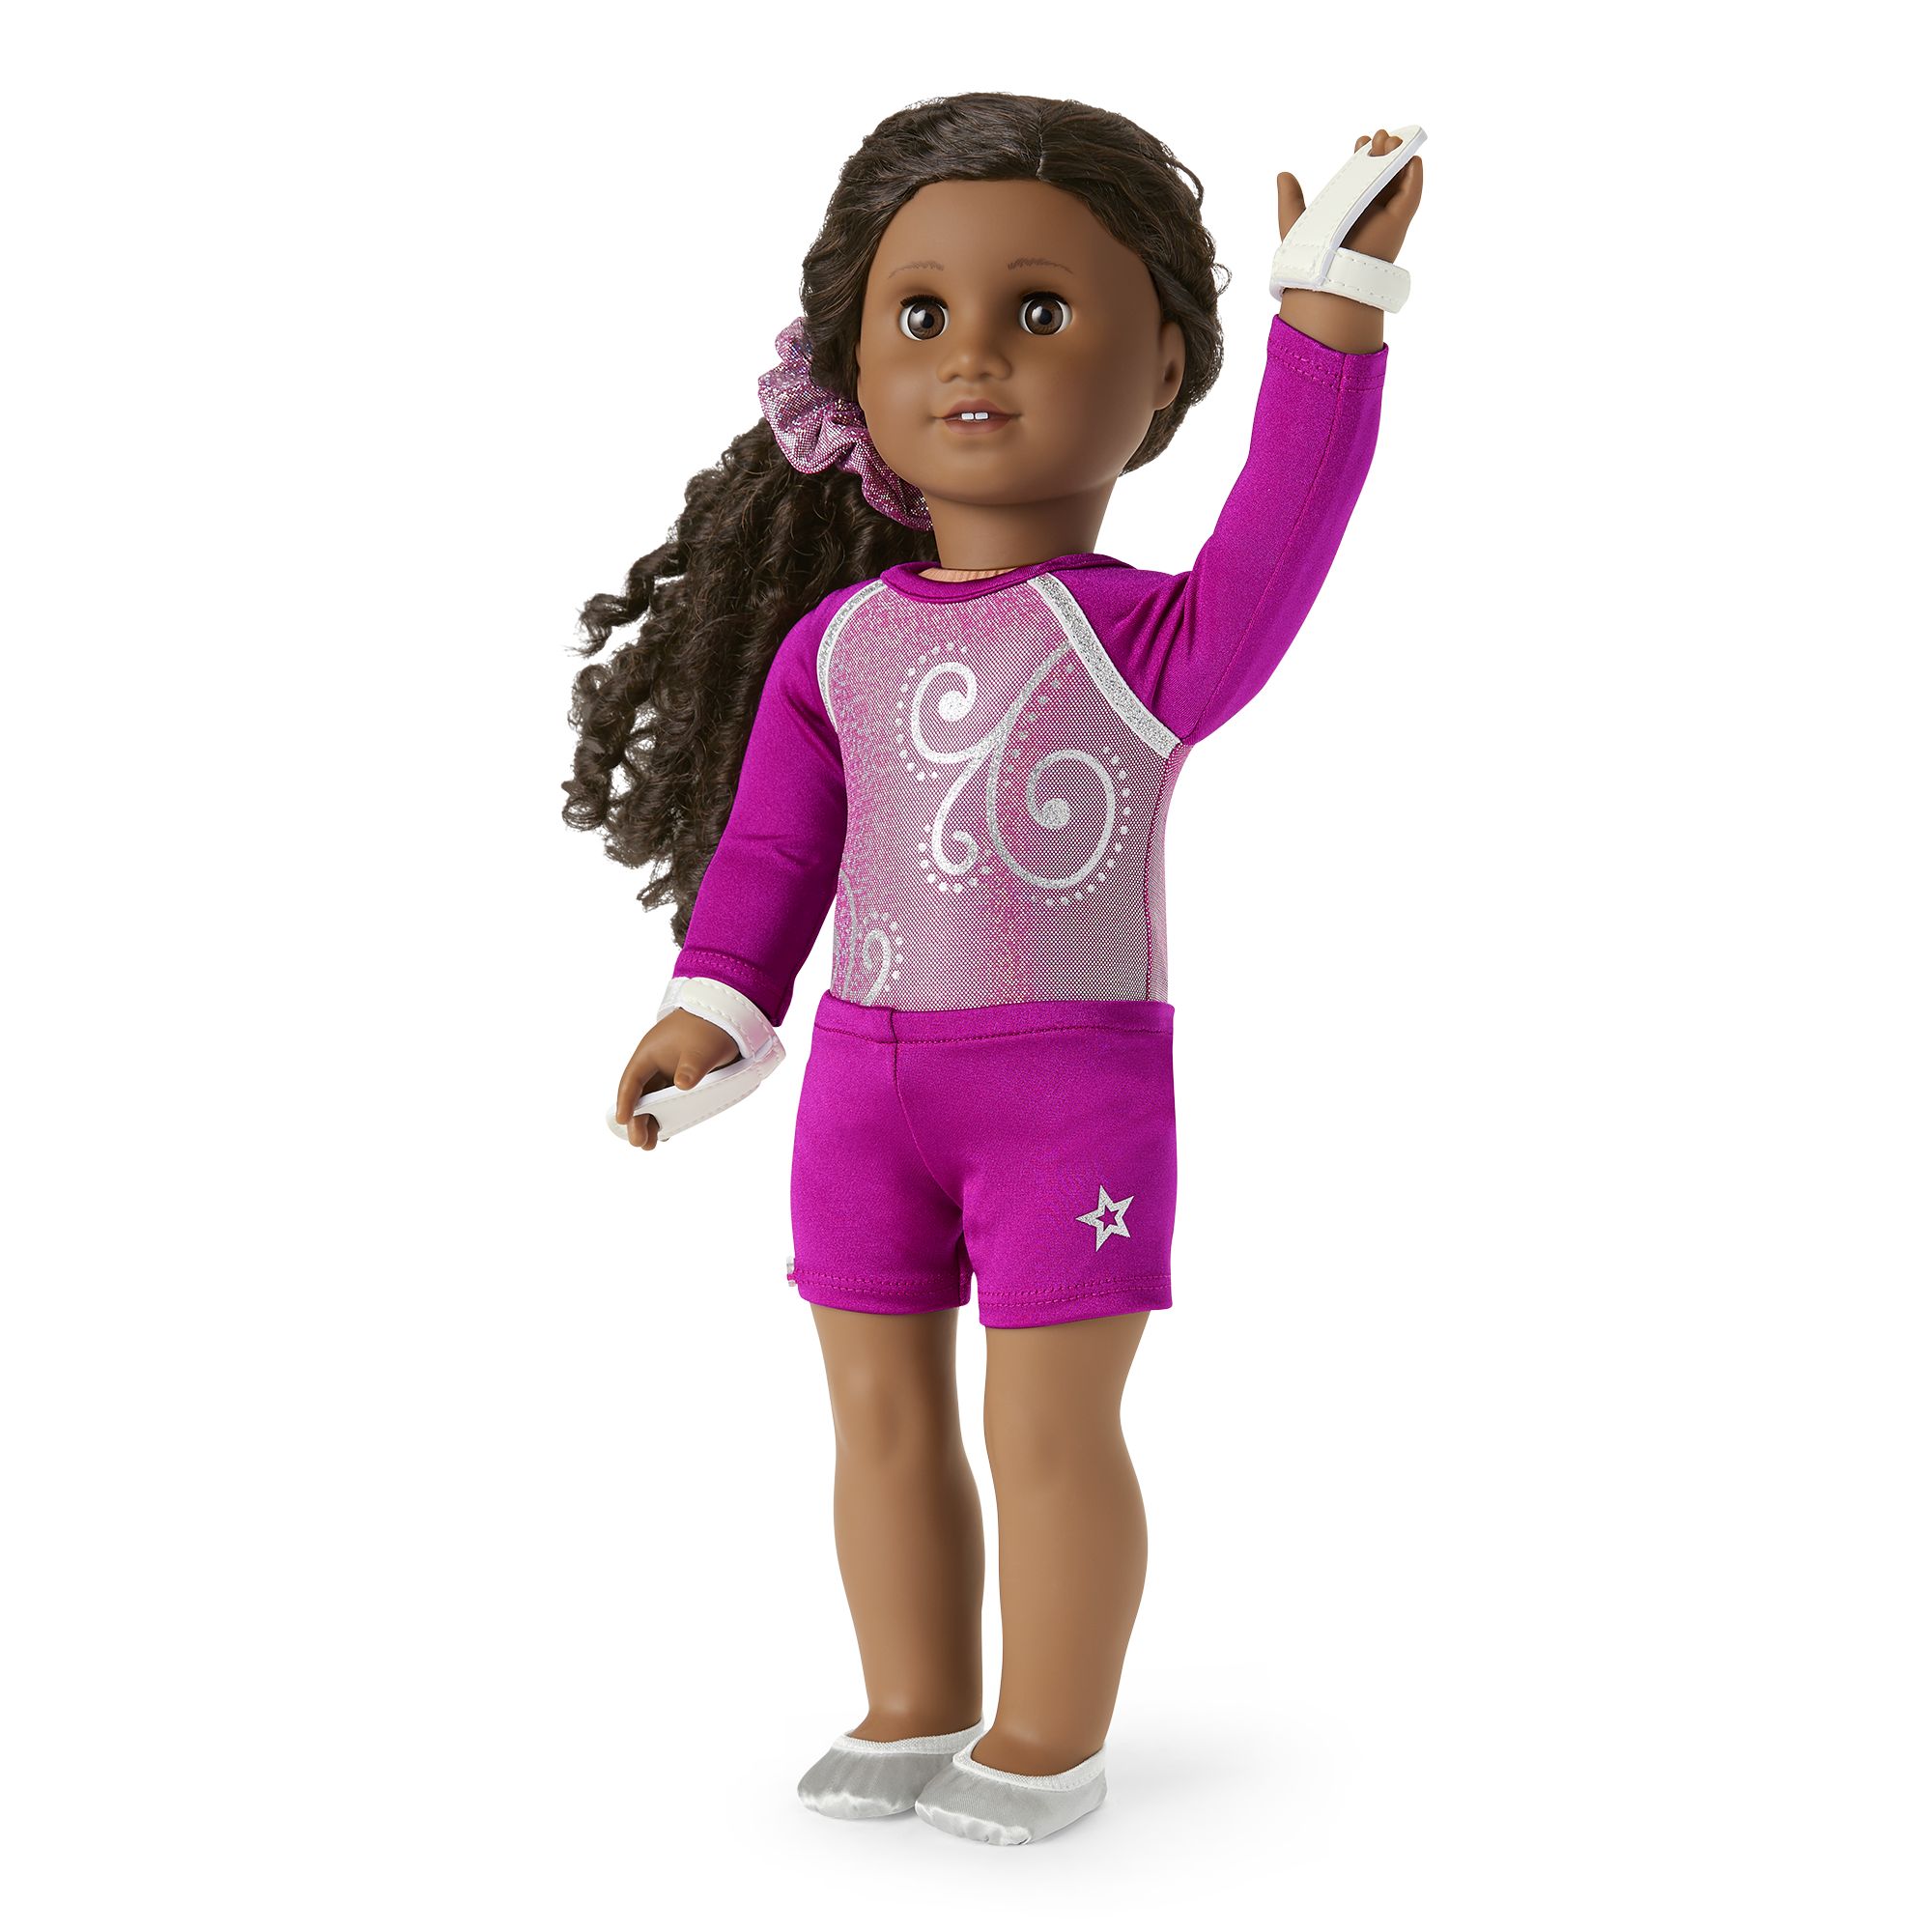 American Girl GYMNASTICS OUTFIT for DOLLS + CHARM - DOLL NOT